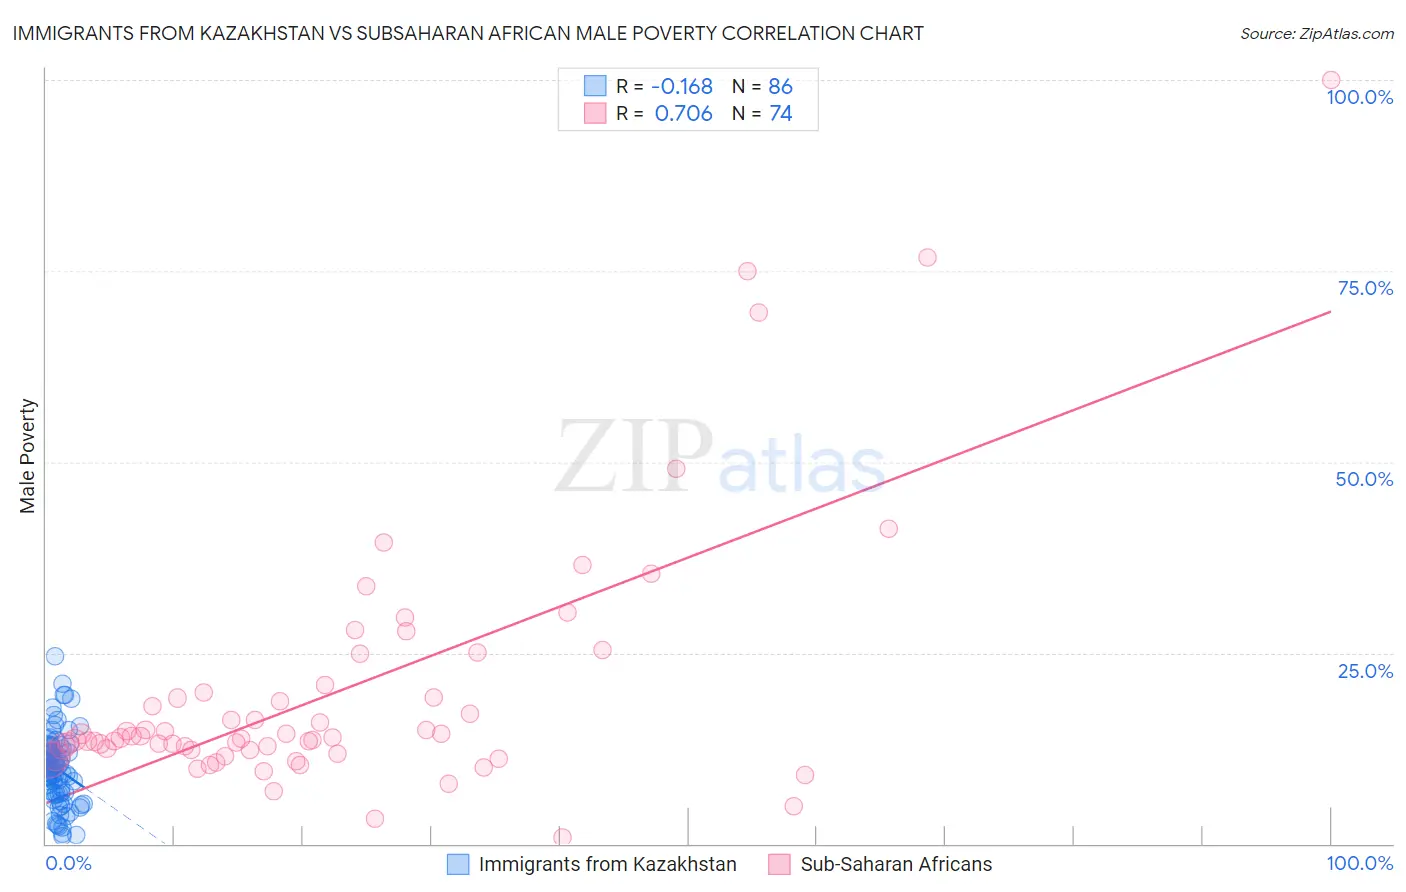 Immigrants from Kazakhstan vs Subsaharan African Male Poverty